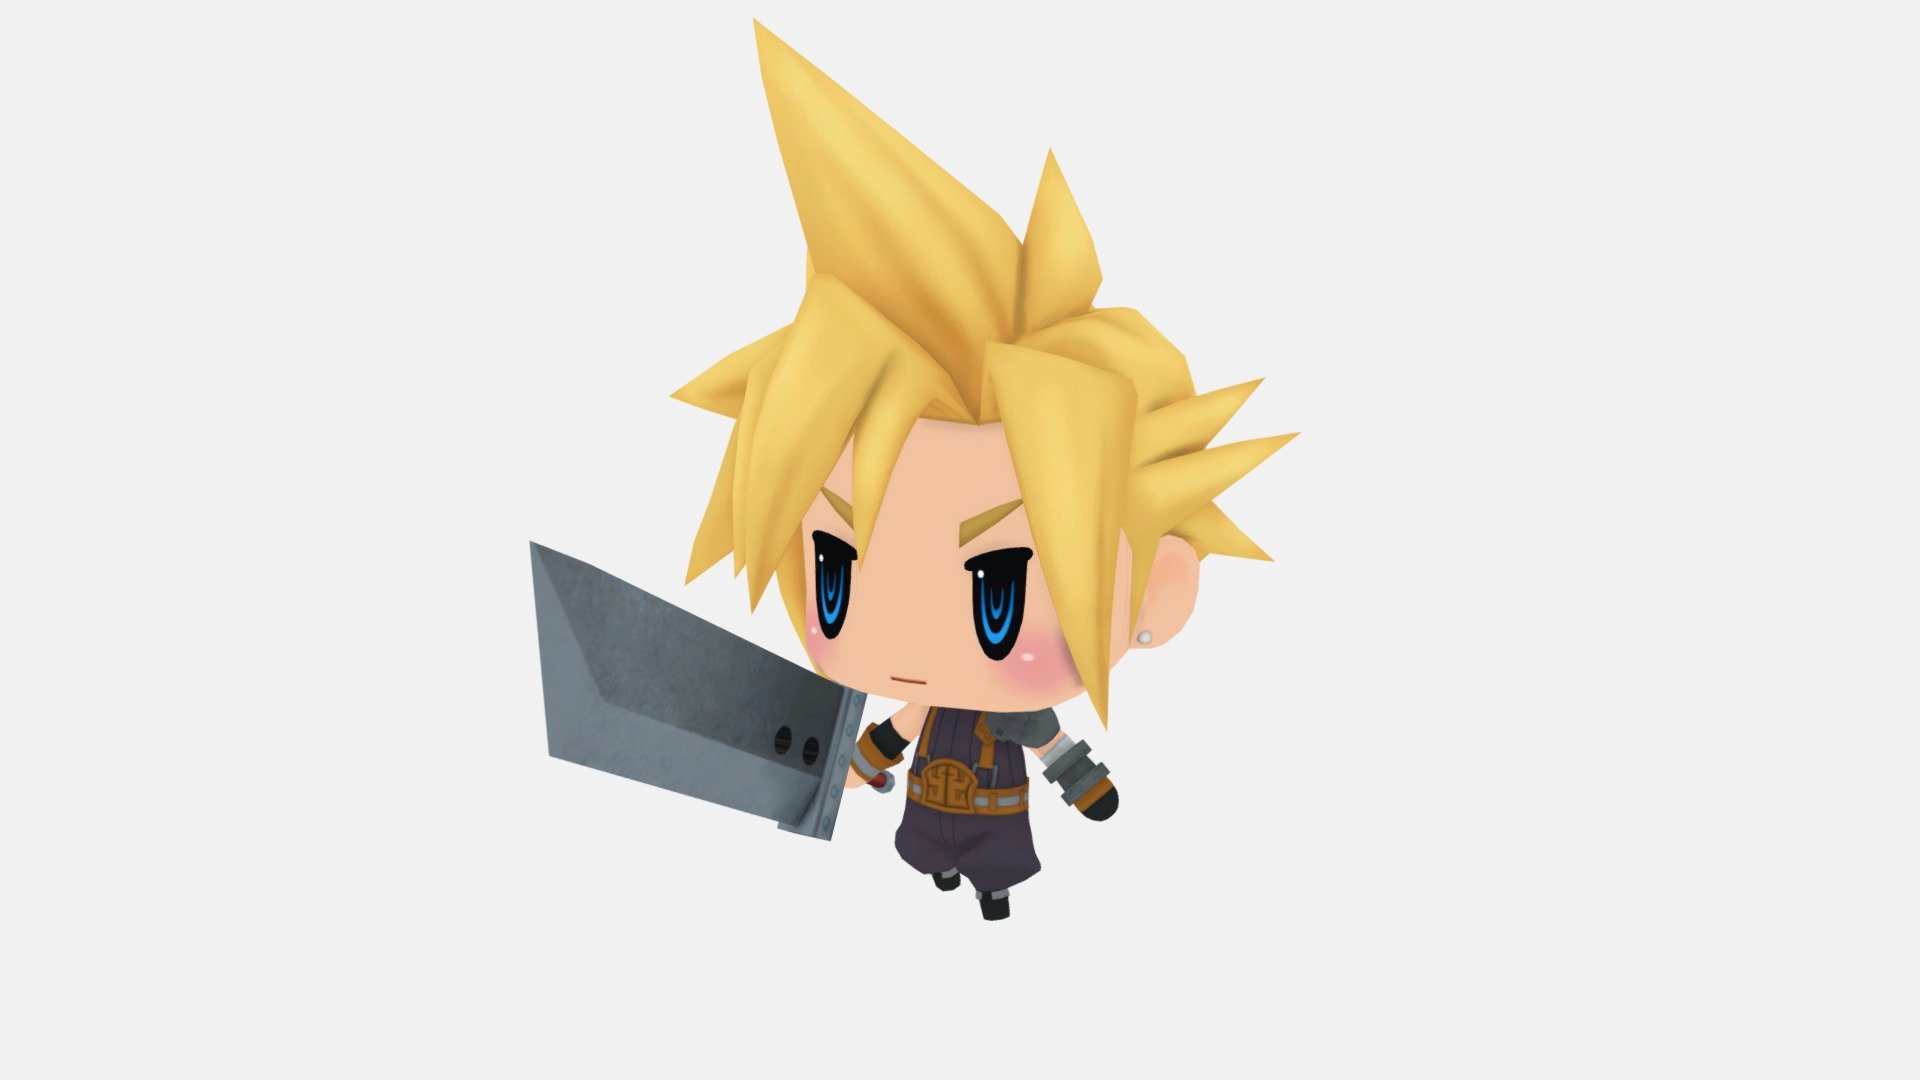 Cloud from World of Final Fantasy